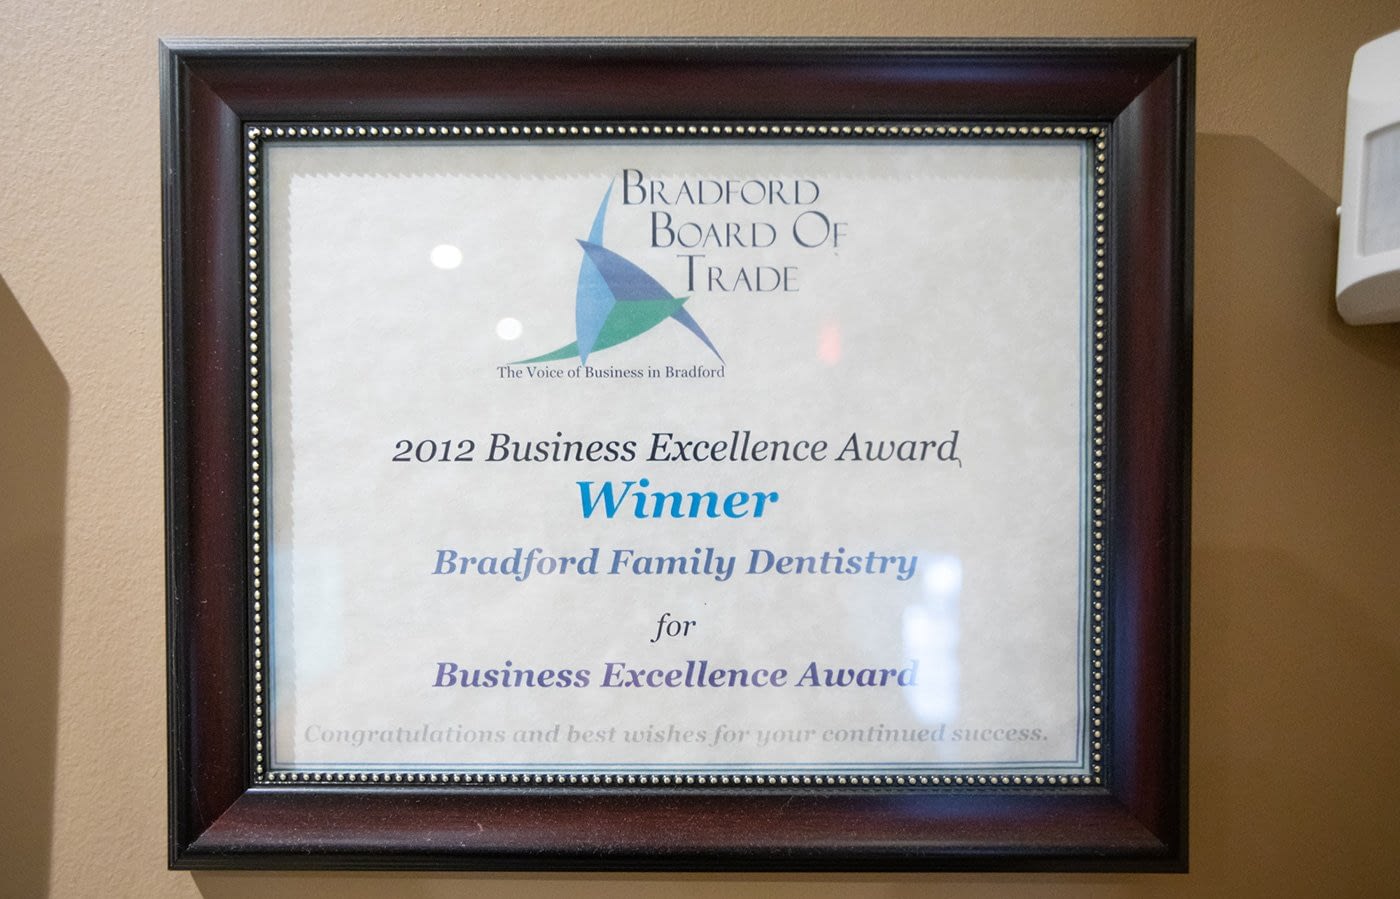 2012 Business Excellence Award - Bradford Board of Trade